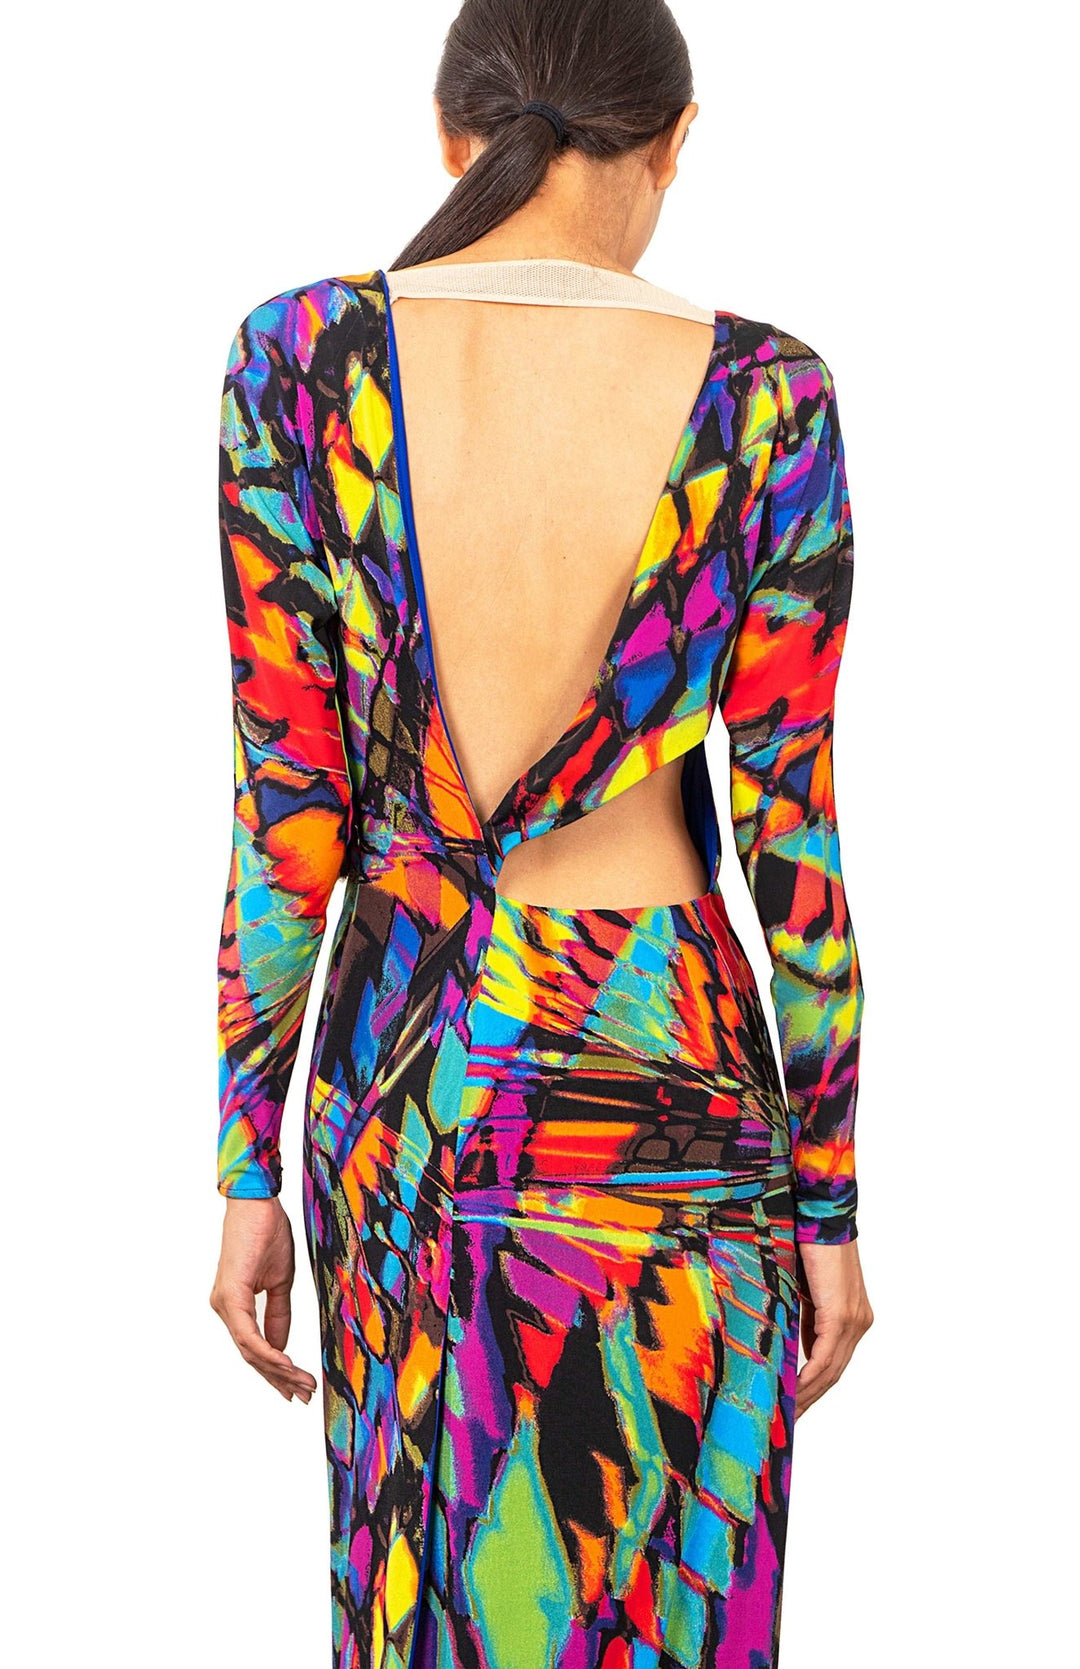 Chic, Grecian style, printed, long sleeve long dress, with back cutout detail in bright colored jersey knit